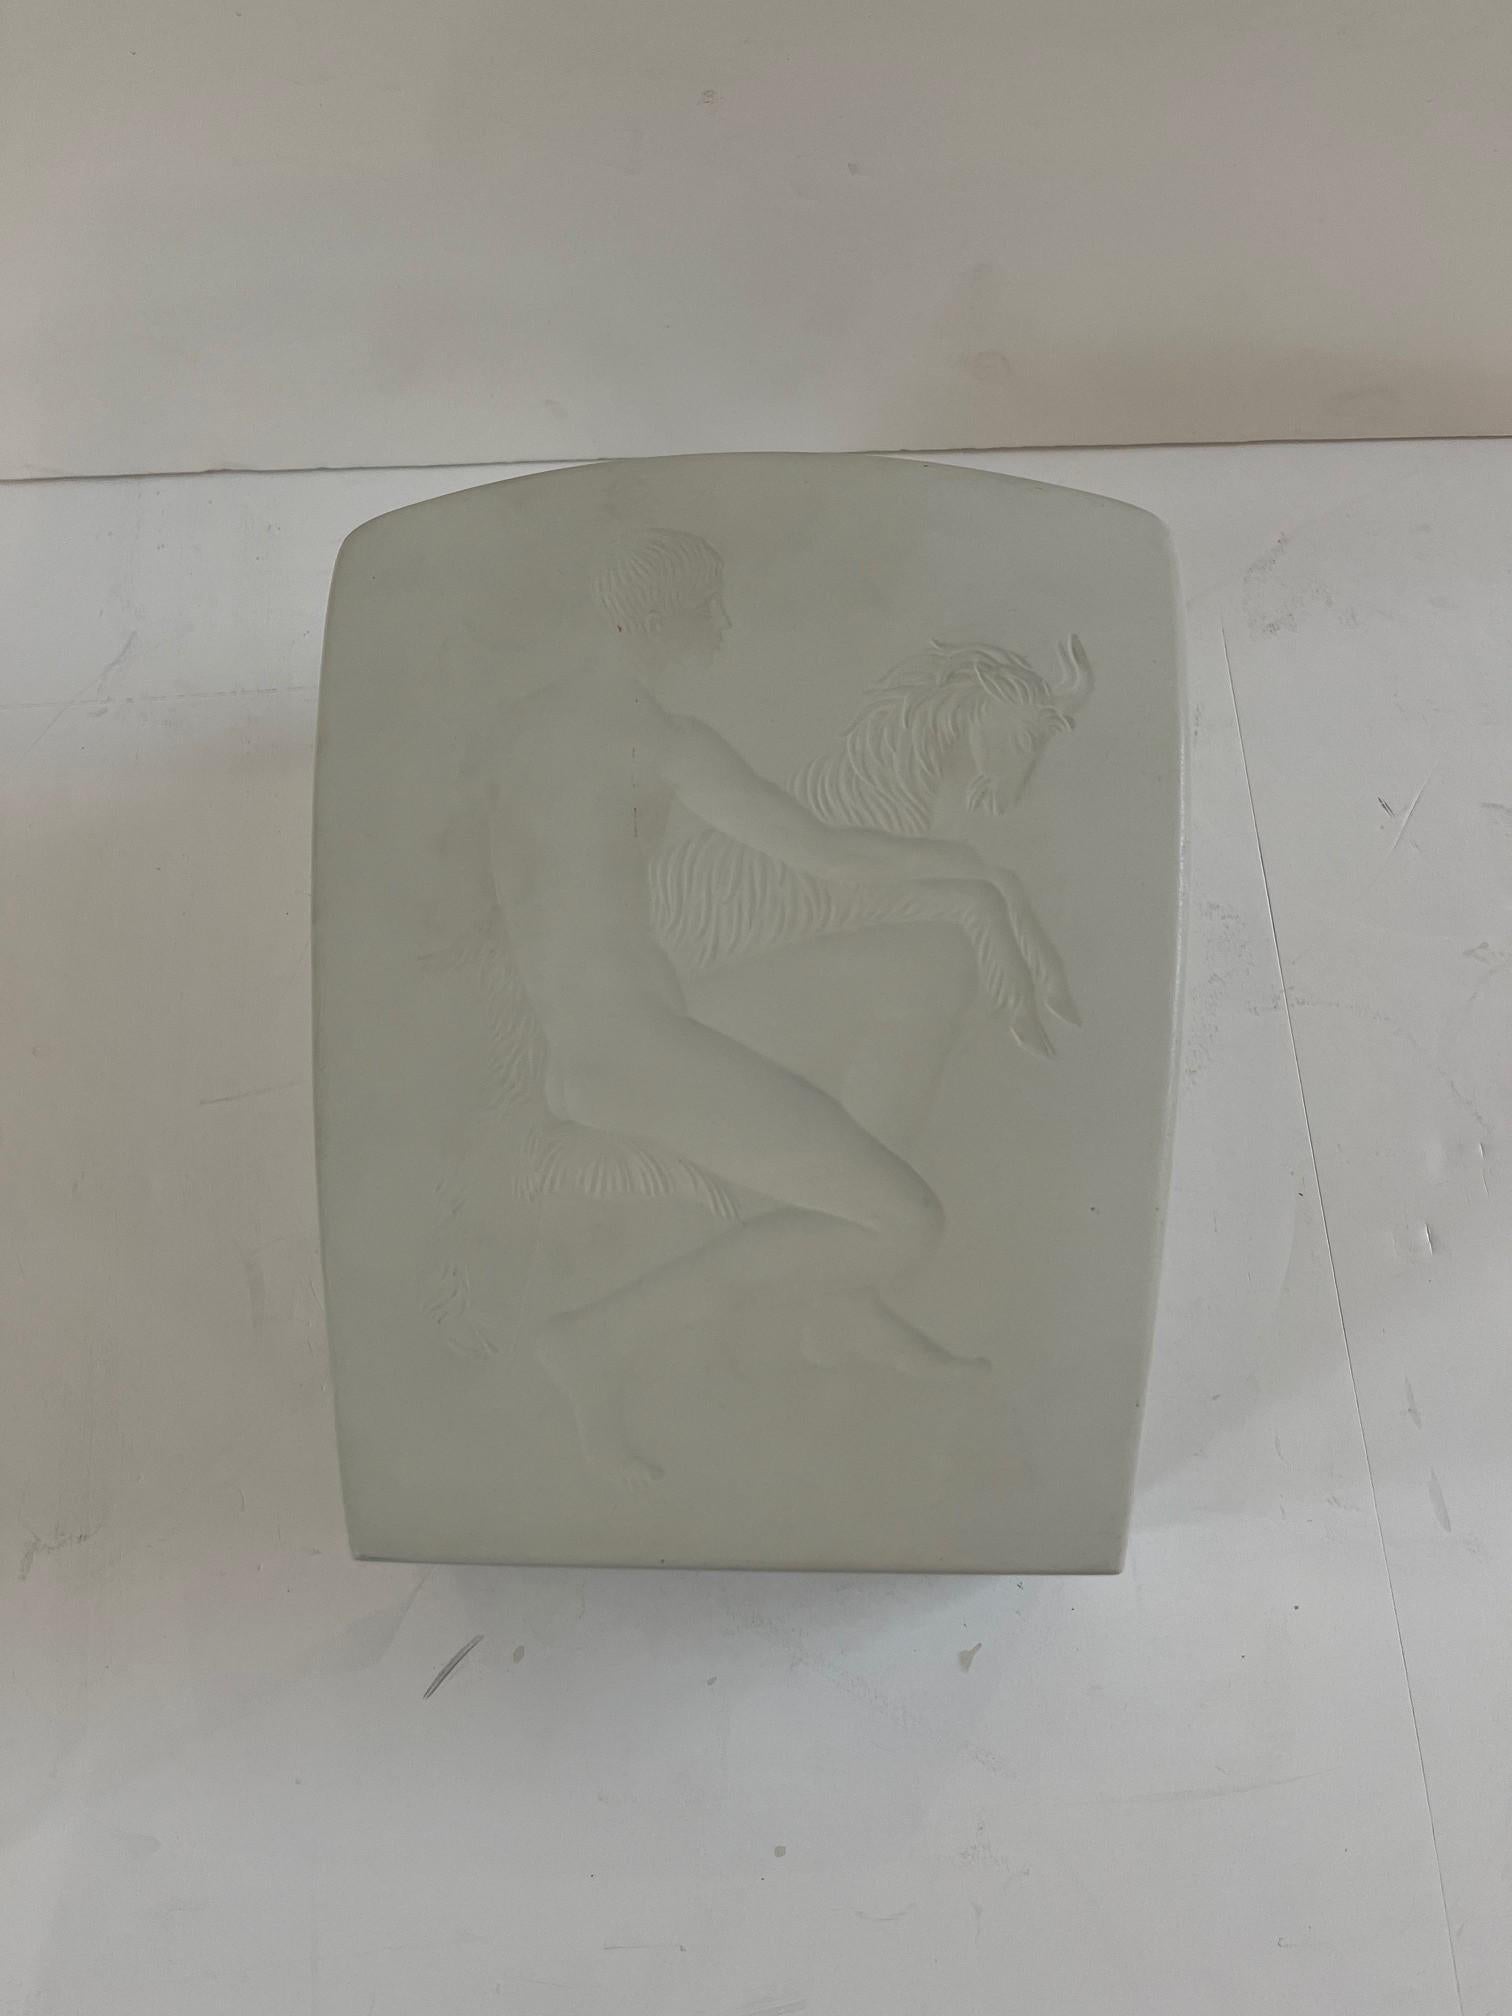 Vintage Exquisite White Vase Featuring Reclining a Man with a Goat by Rena Rosenthal
Signed 